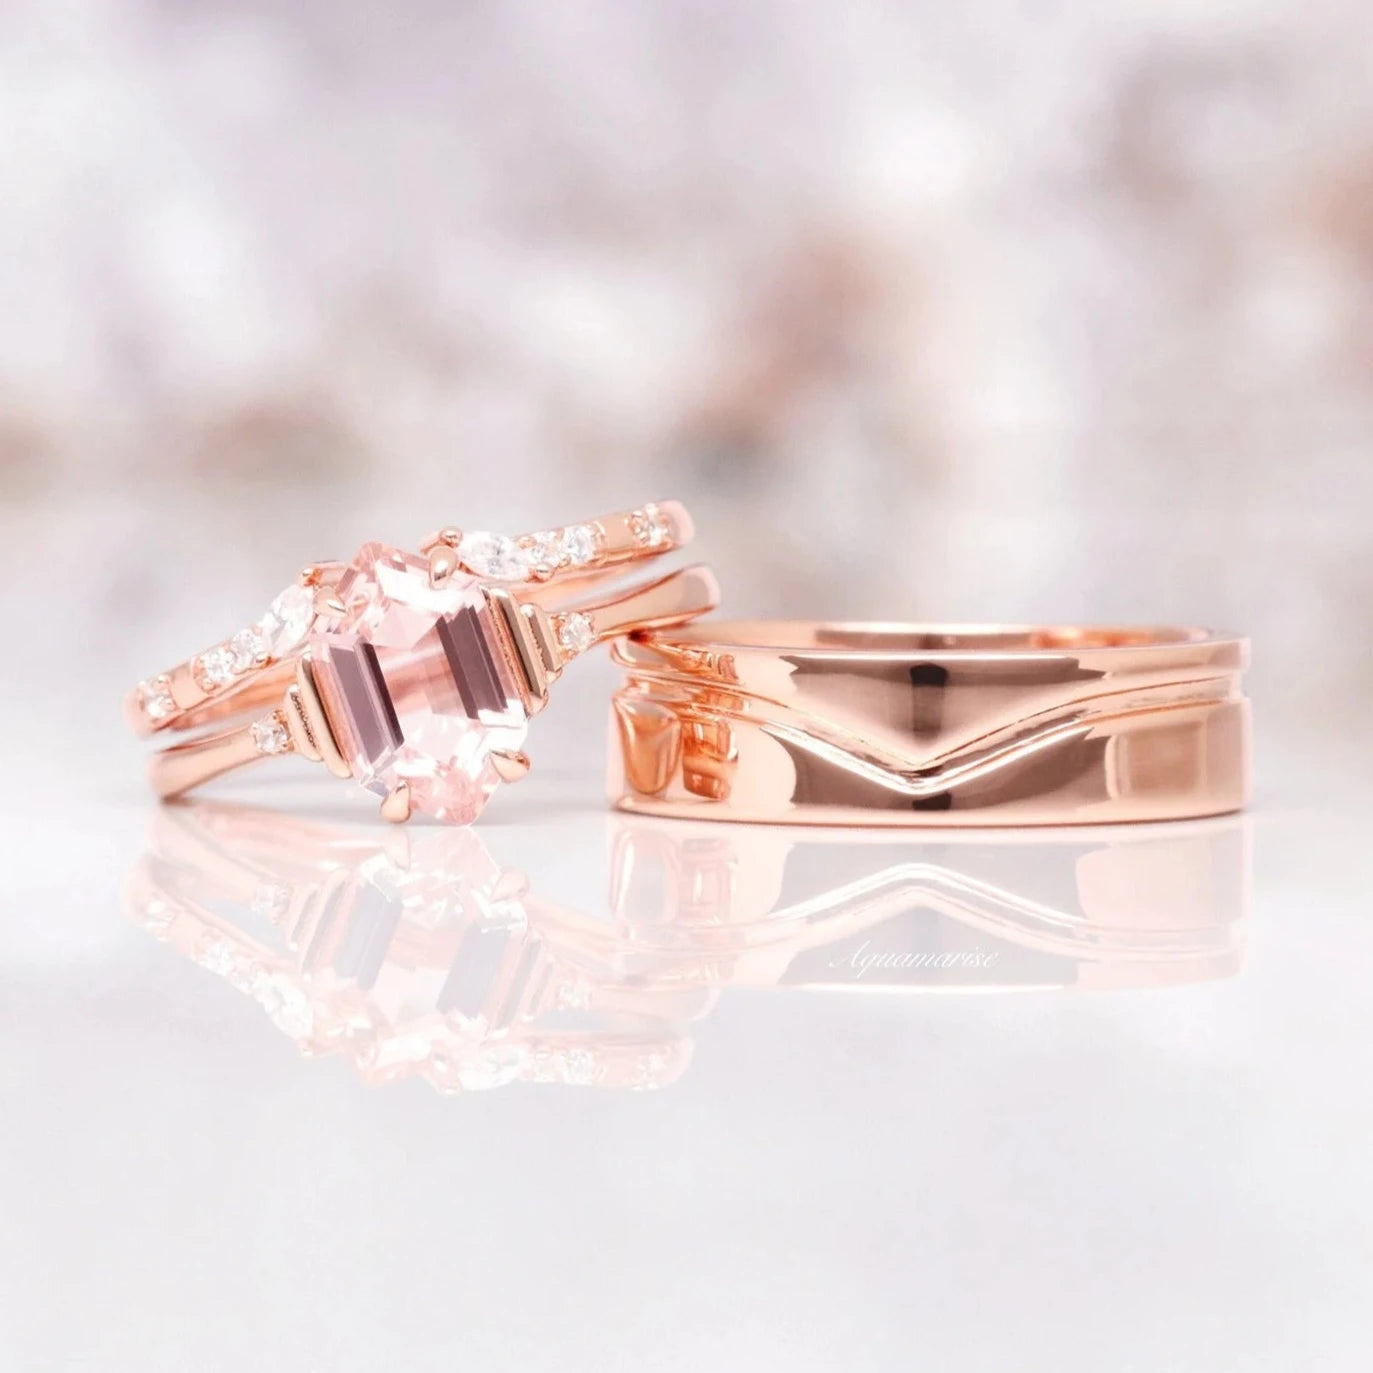 Hexagon Morganite Couples Ring- 14K Rose Gold Vermeil His and Hers Ring Set